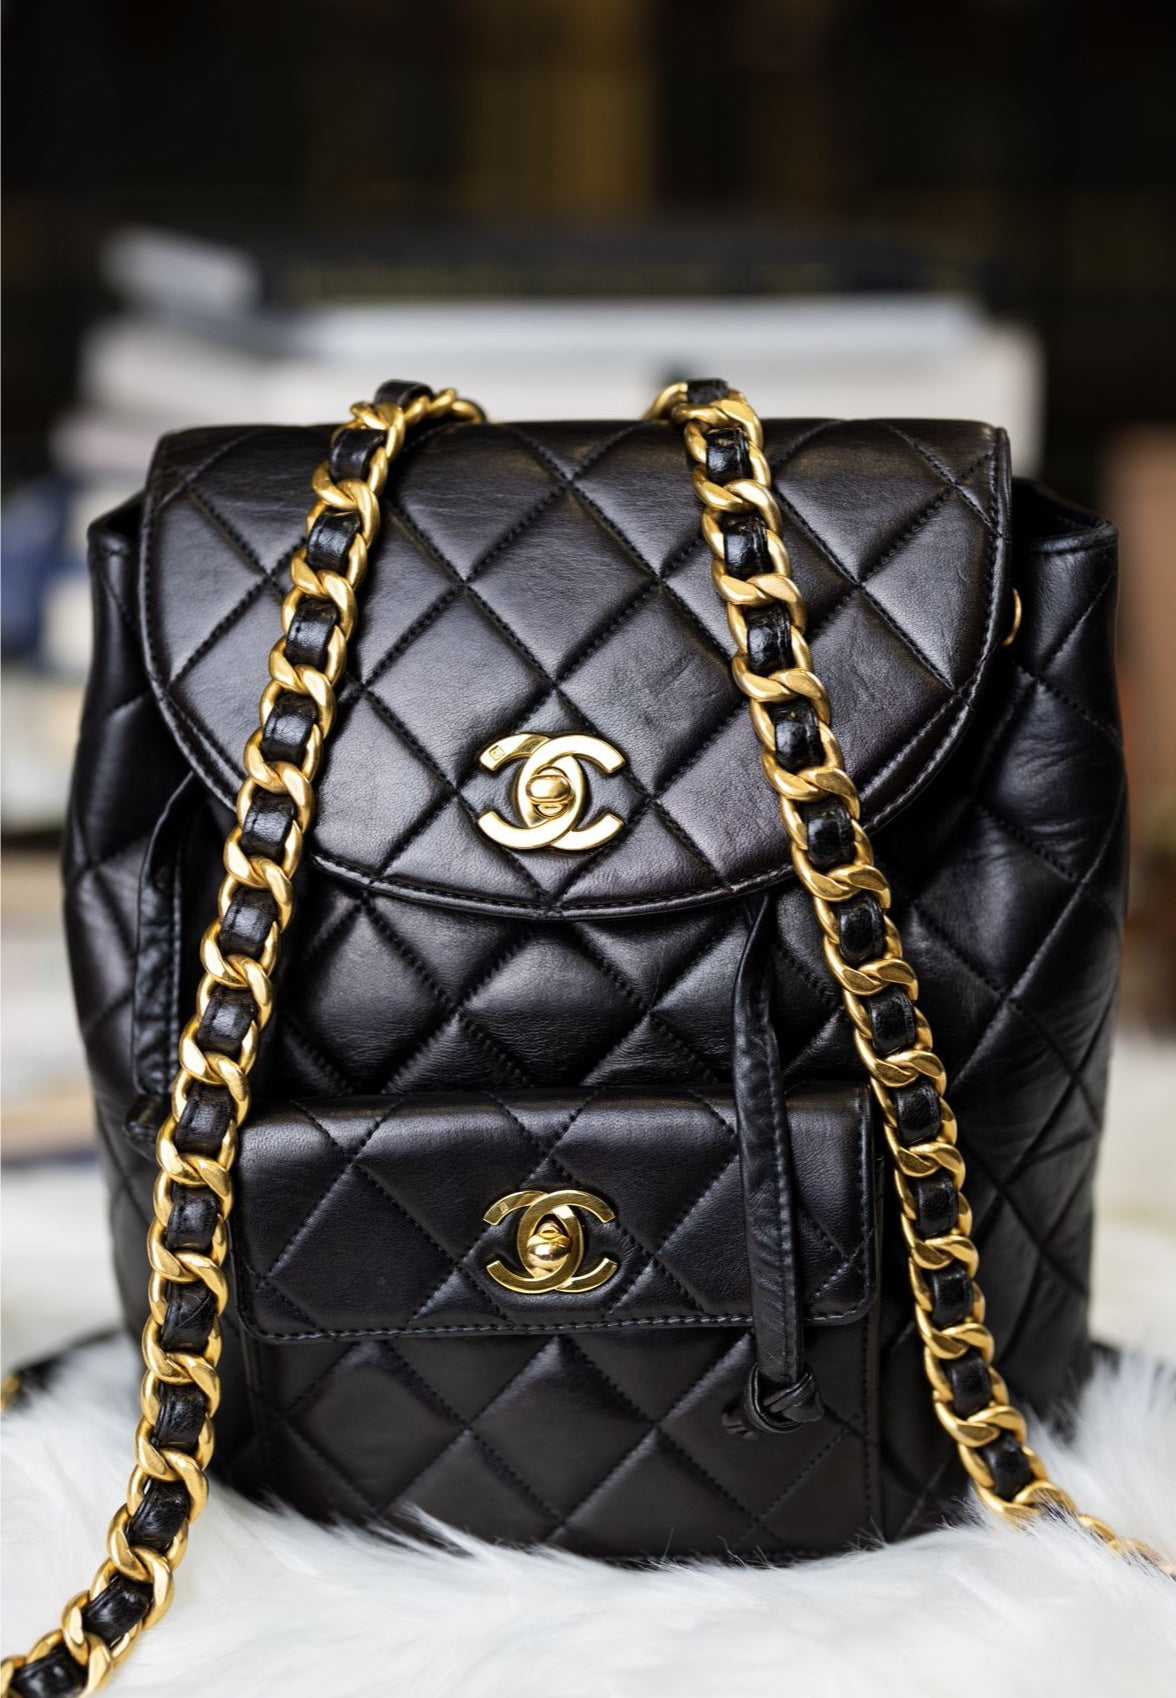 chanel large tote bag leather